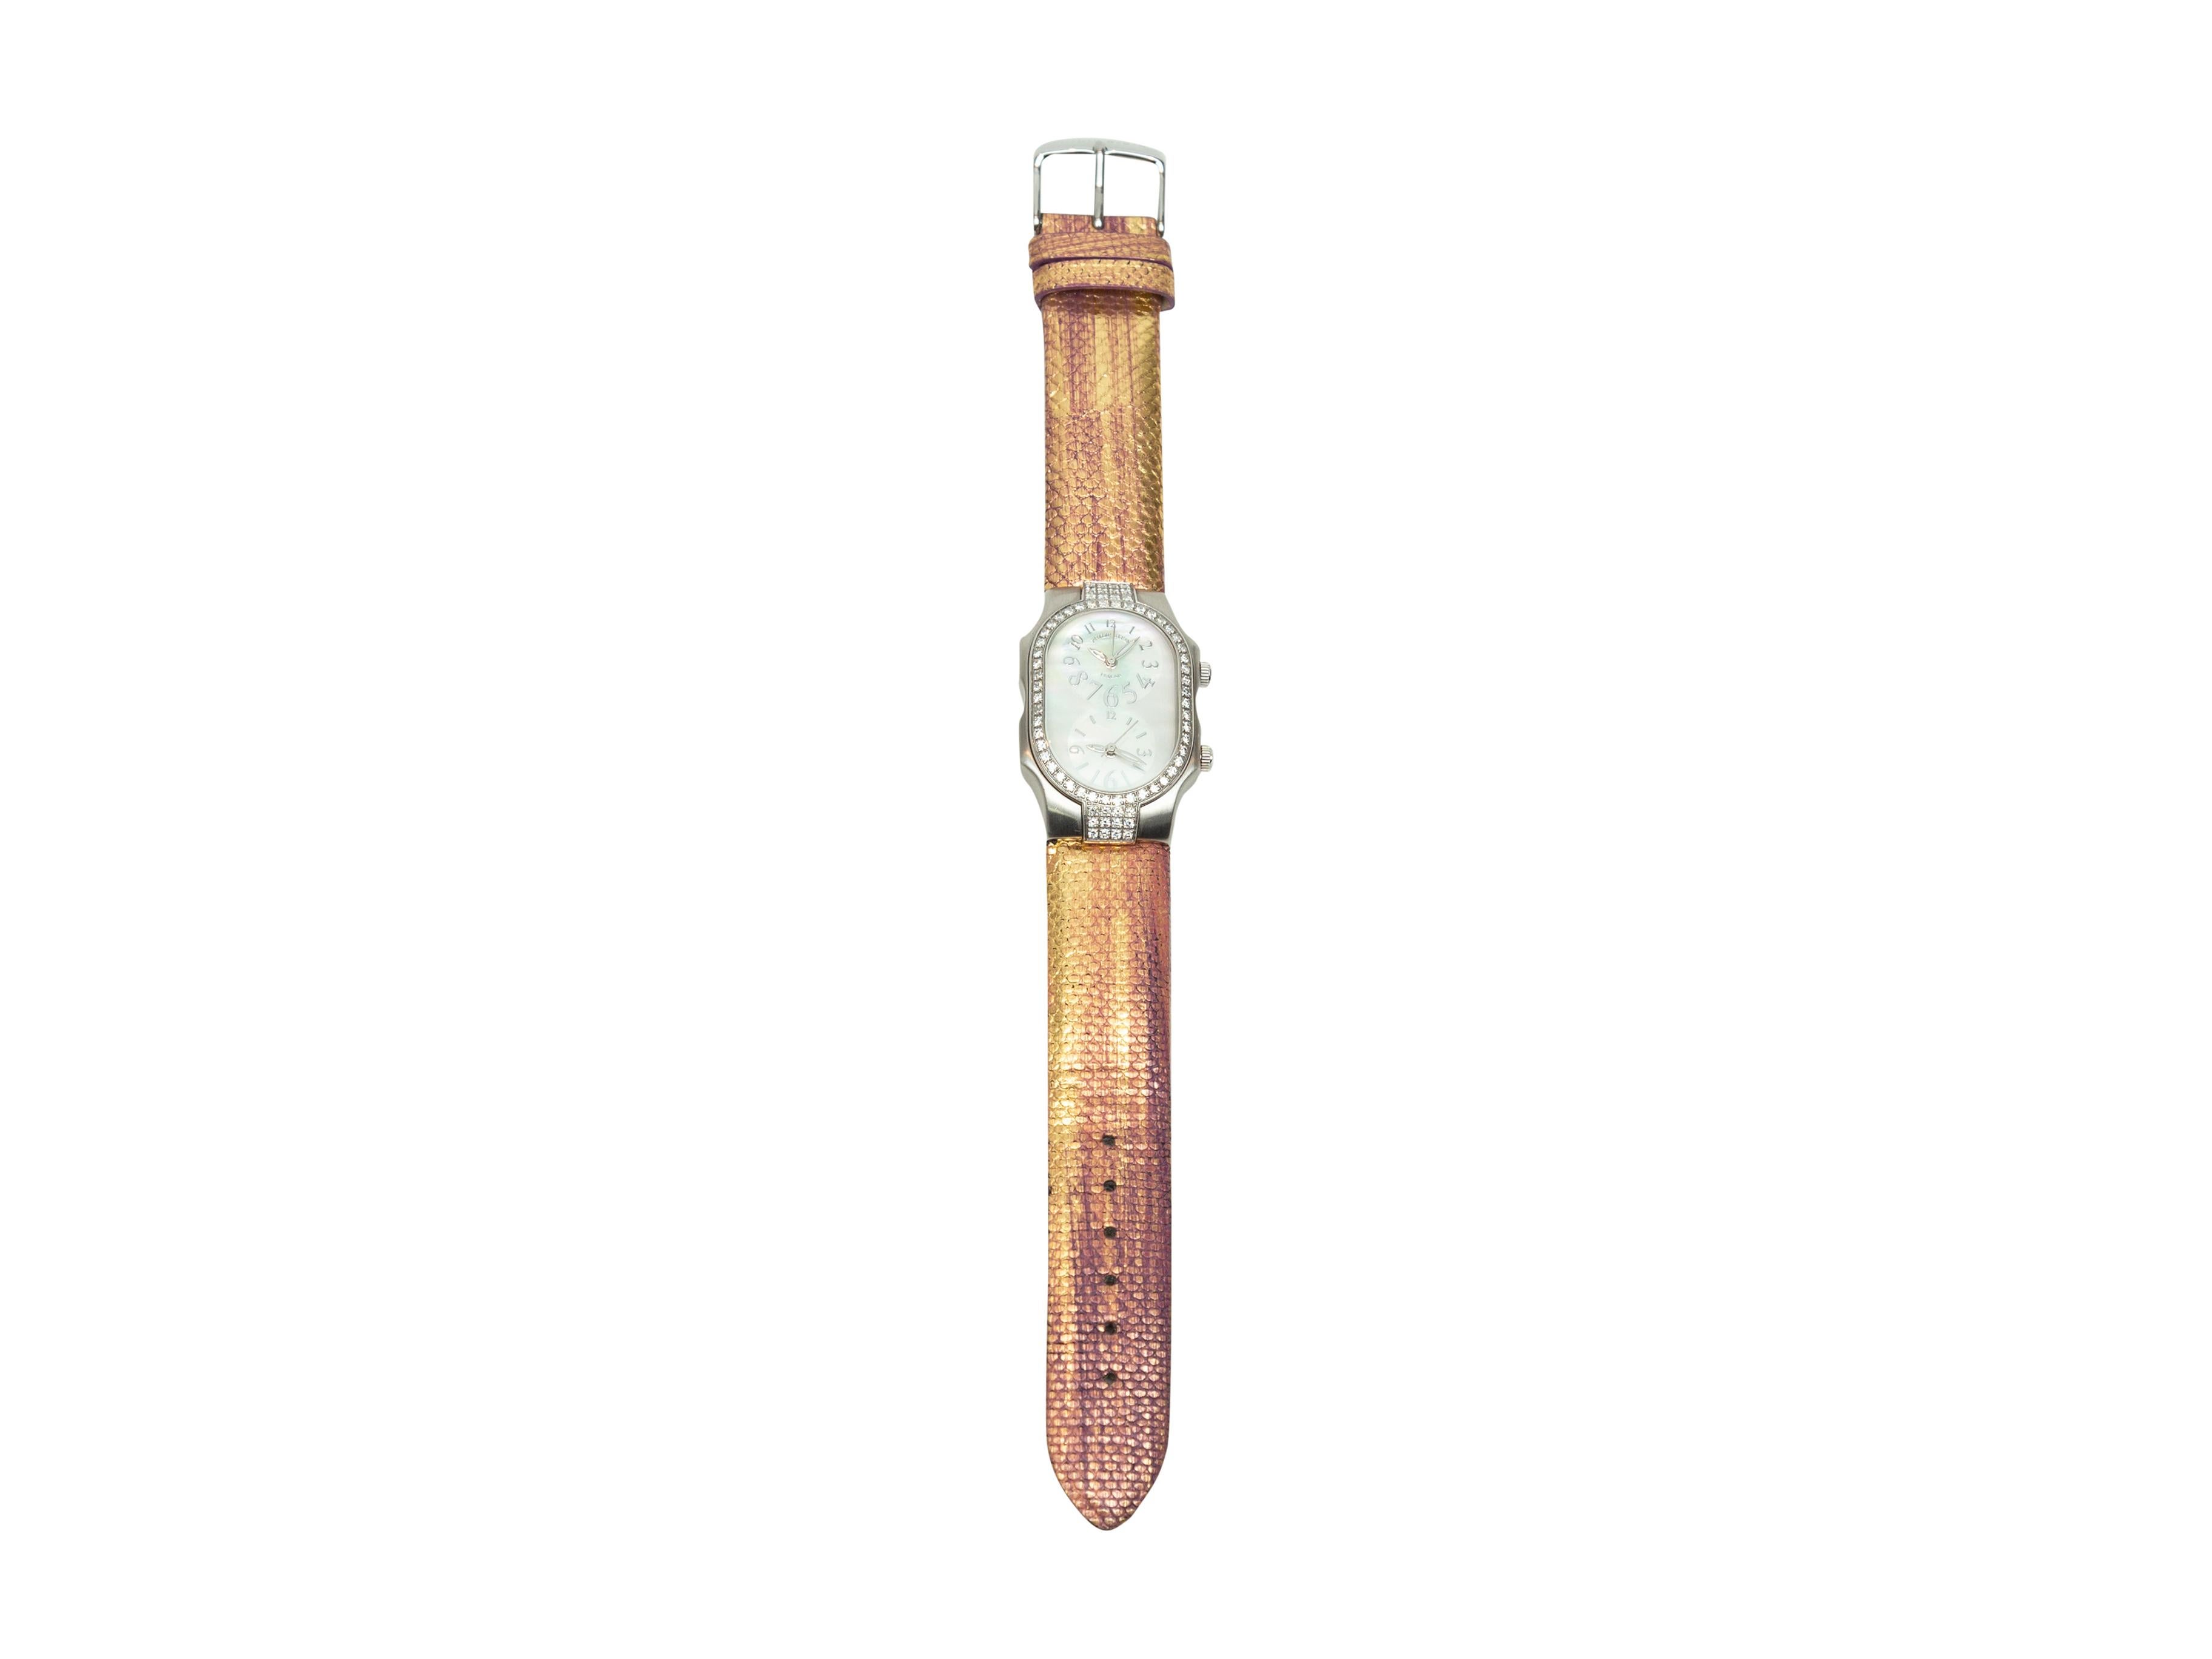 Product Details: Iridescent karung dual face watch by Philip Stein. Includes three interchangeable watch bands. 9